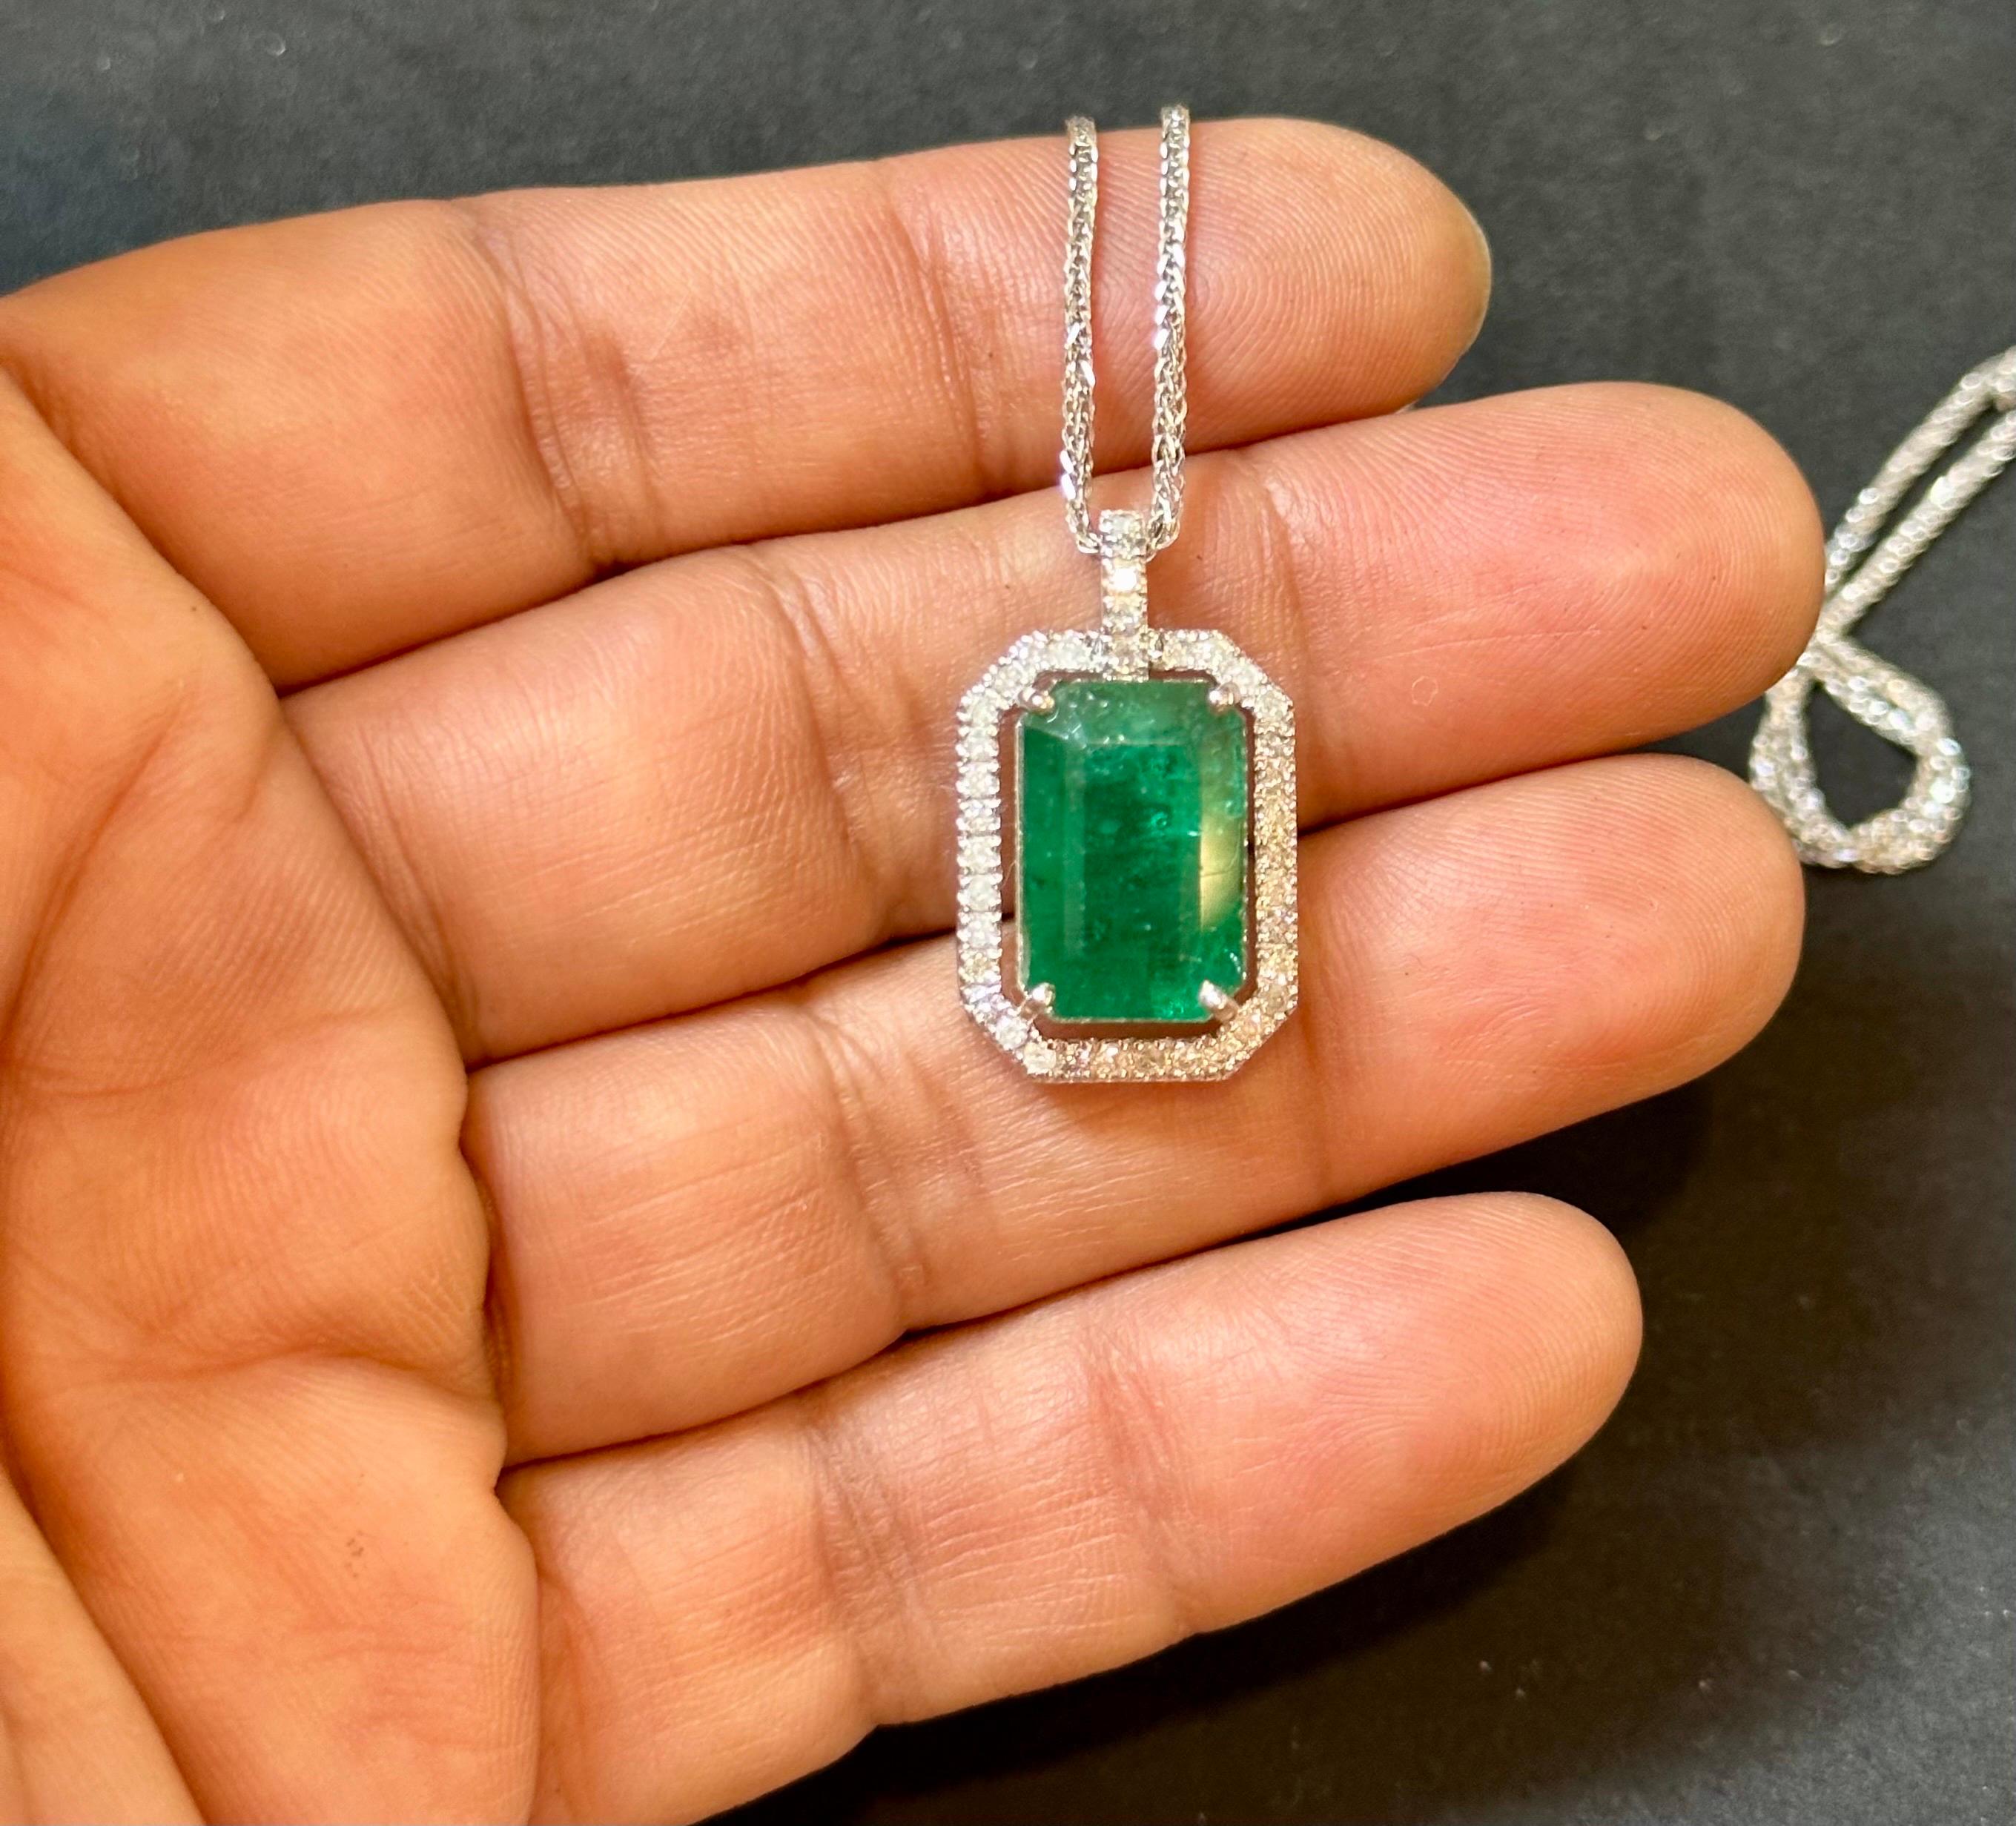 Exact known weight 8.37 Ct Natural Emerald Cut Zambian Emerald Pendant with approximately 0.65 ct of diamond Halo with 14 Karat White Gold Necklace 18